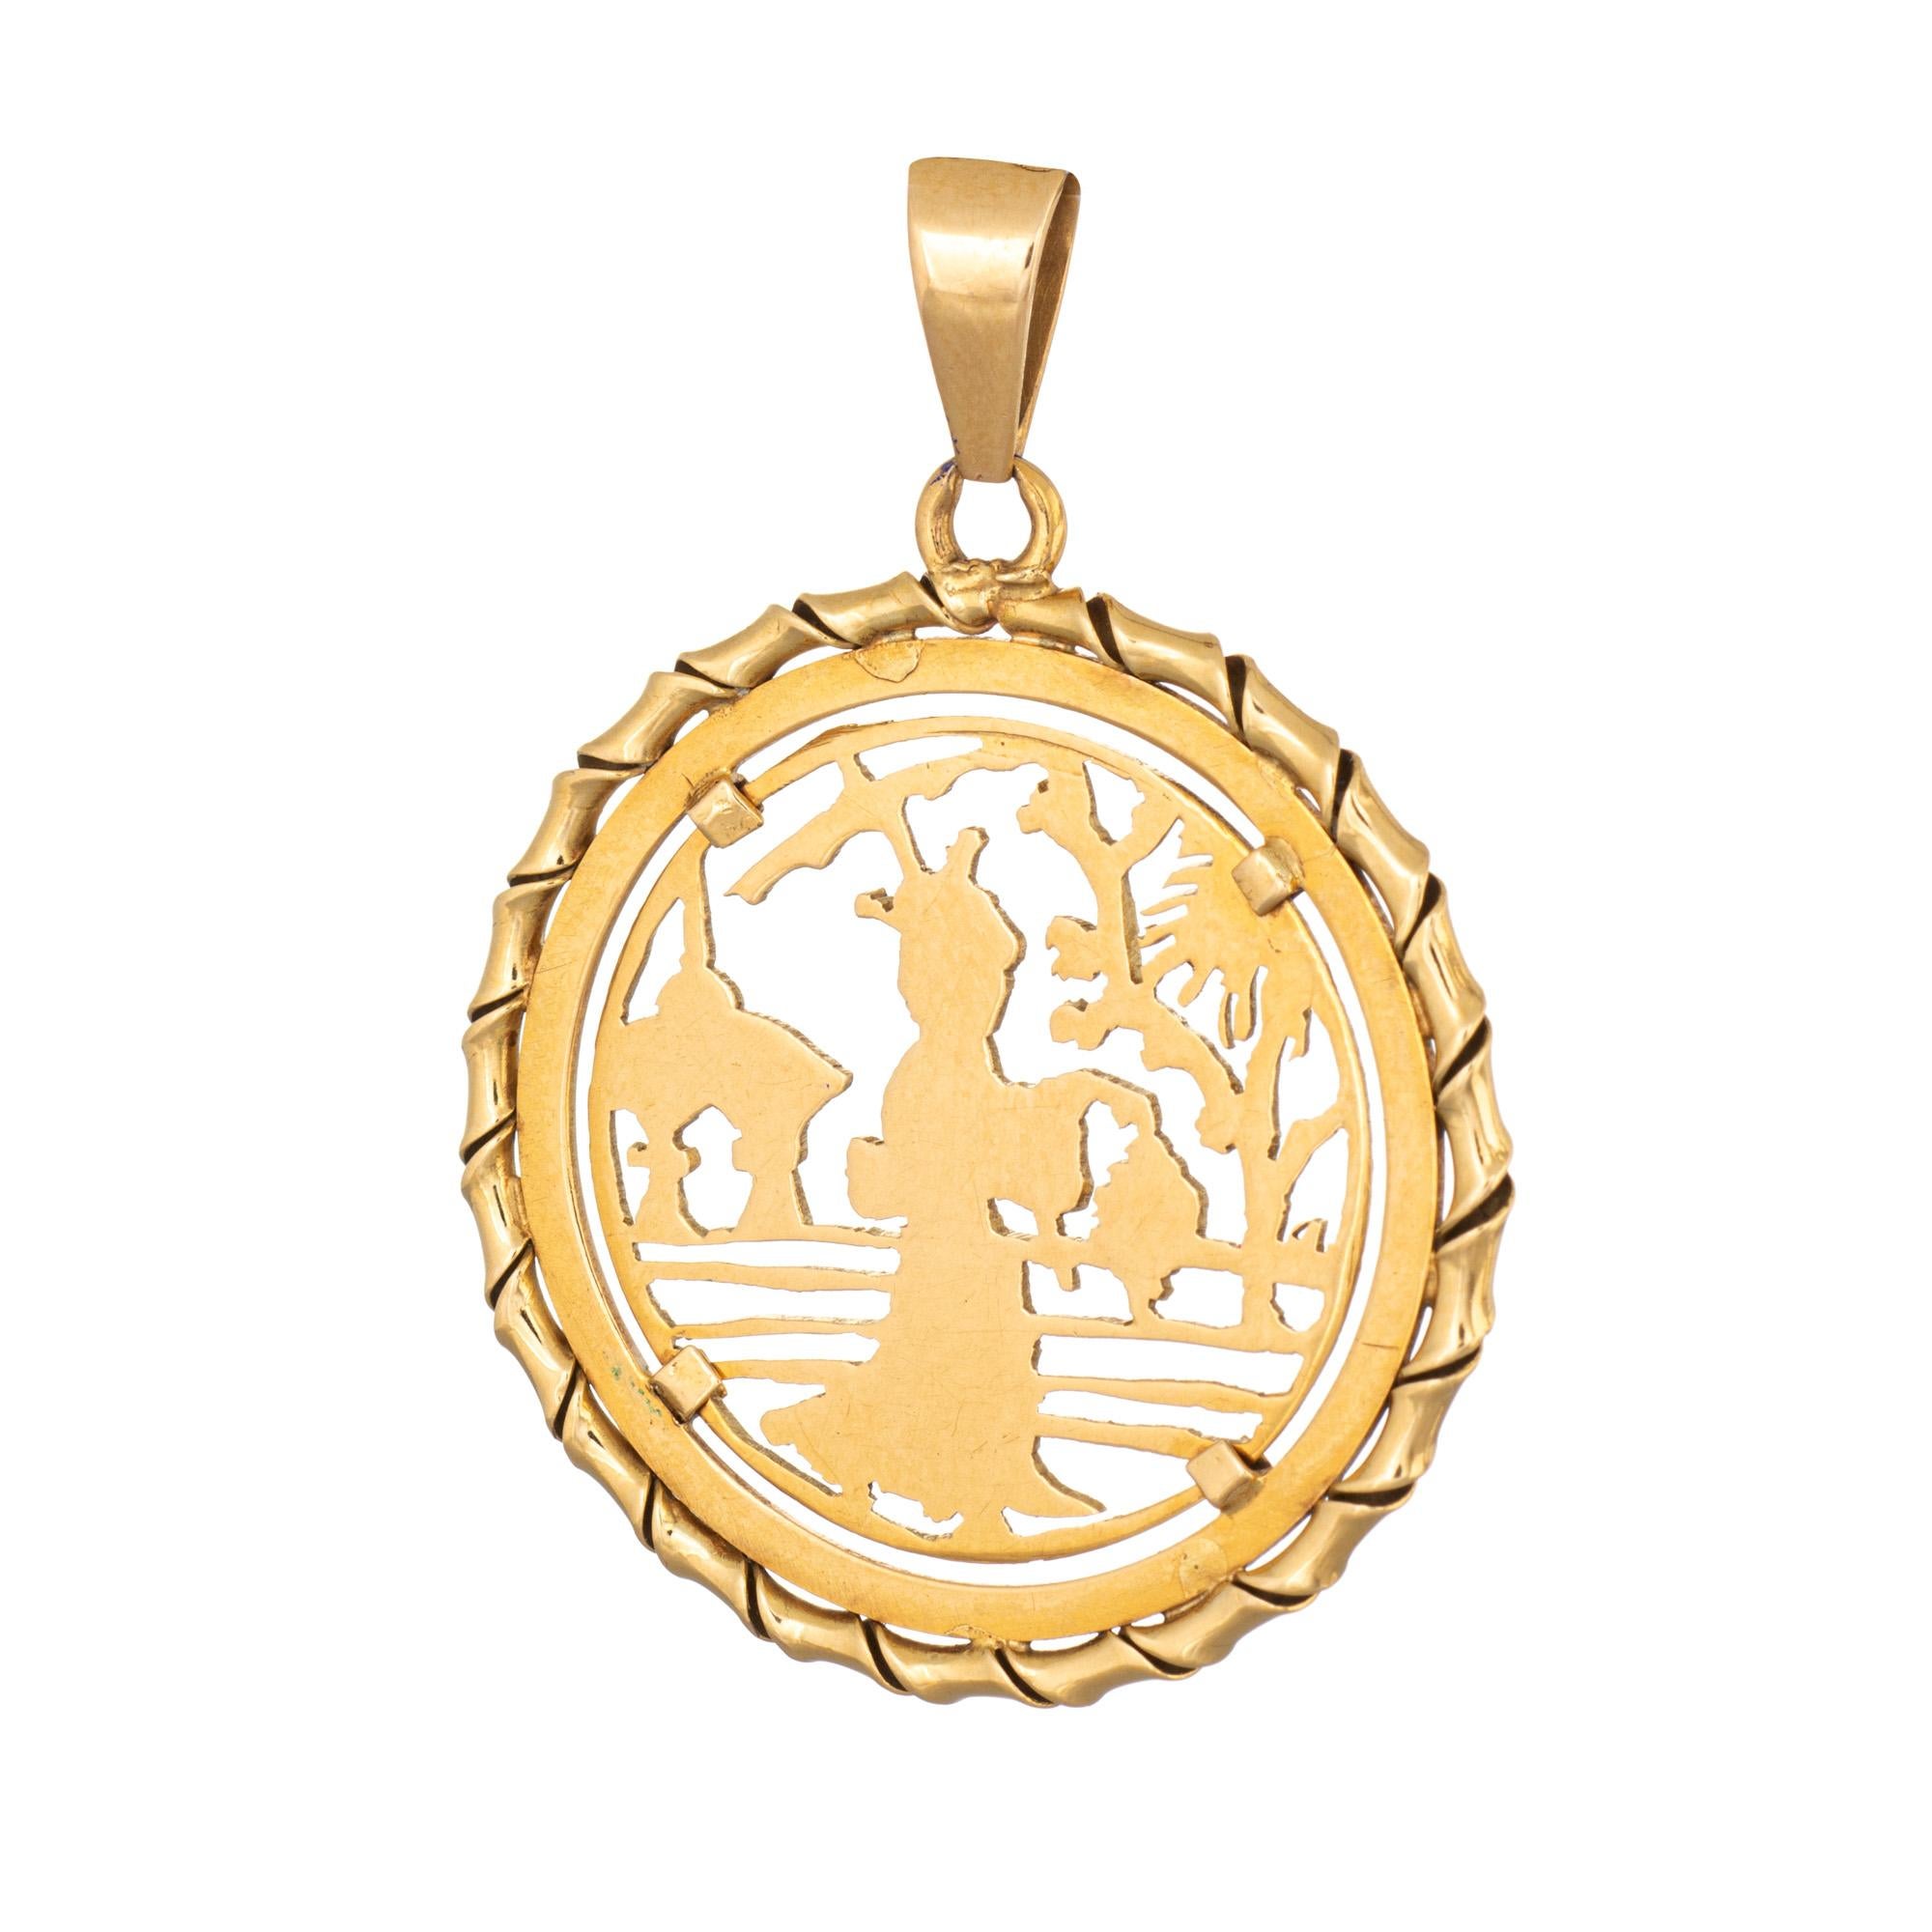 Finely detailed vintage Japanese pendant crafted in 18k yellow gold.  

The pendant features a Kimono clad figure carrying a lantern with a Temple and Cherry Blossom backdrop. The pendant is bordered with a tubular ribbon style design. Ideal worn as